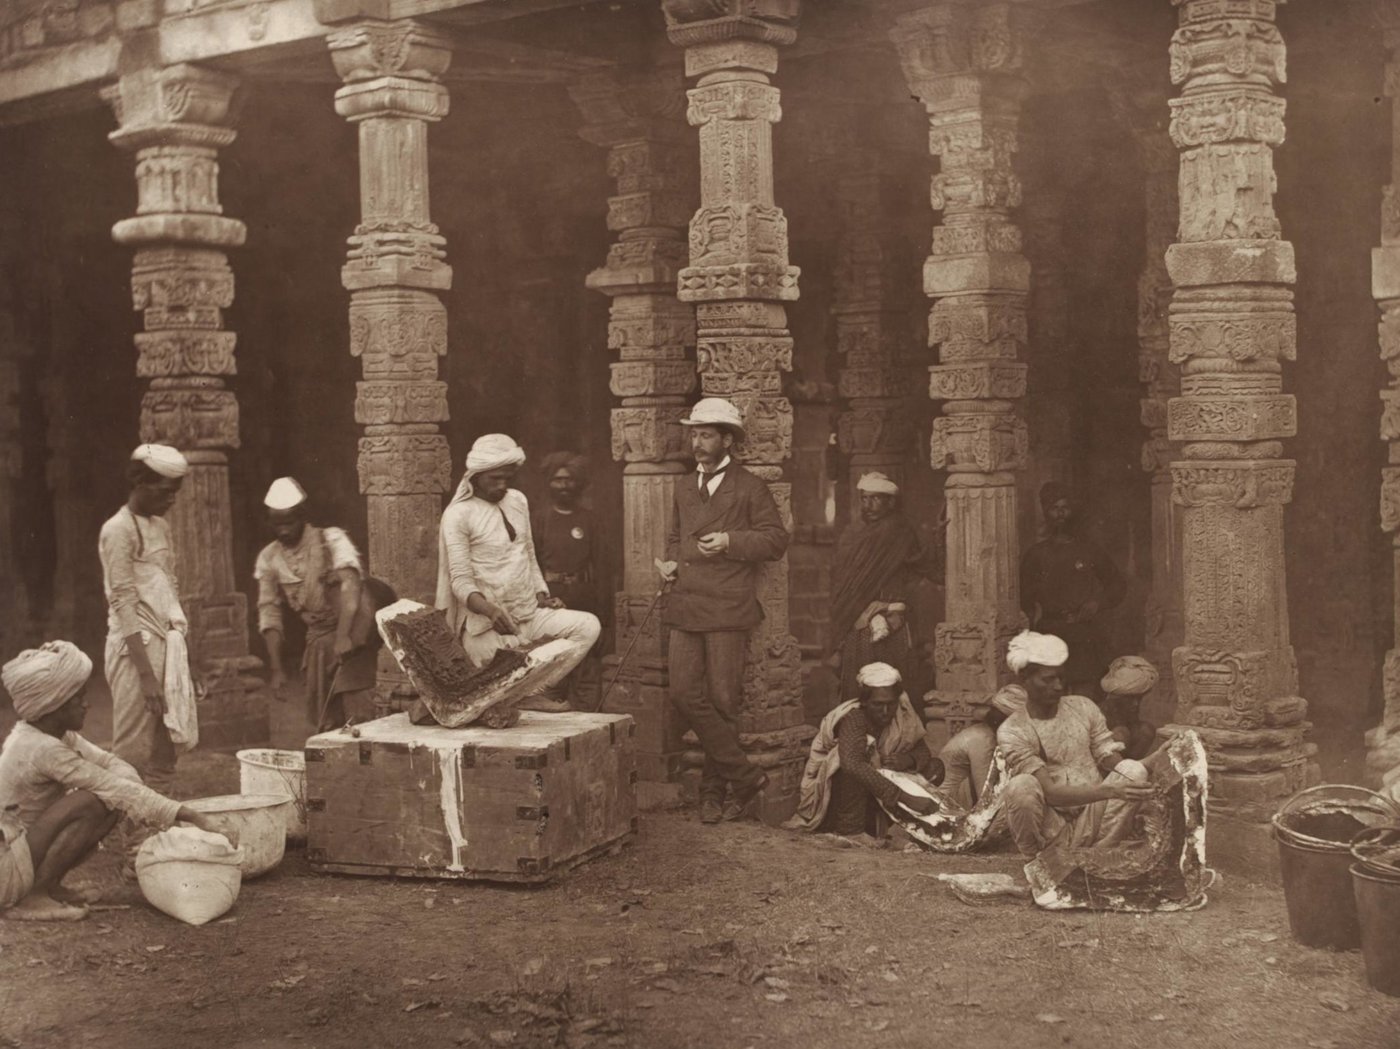 Indian moulders, supervised by a colonial official, at work. Qutb Minar, Delhi, 1856